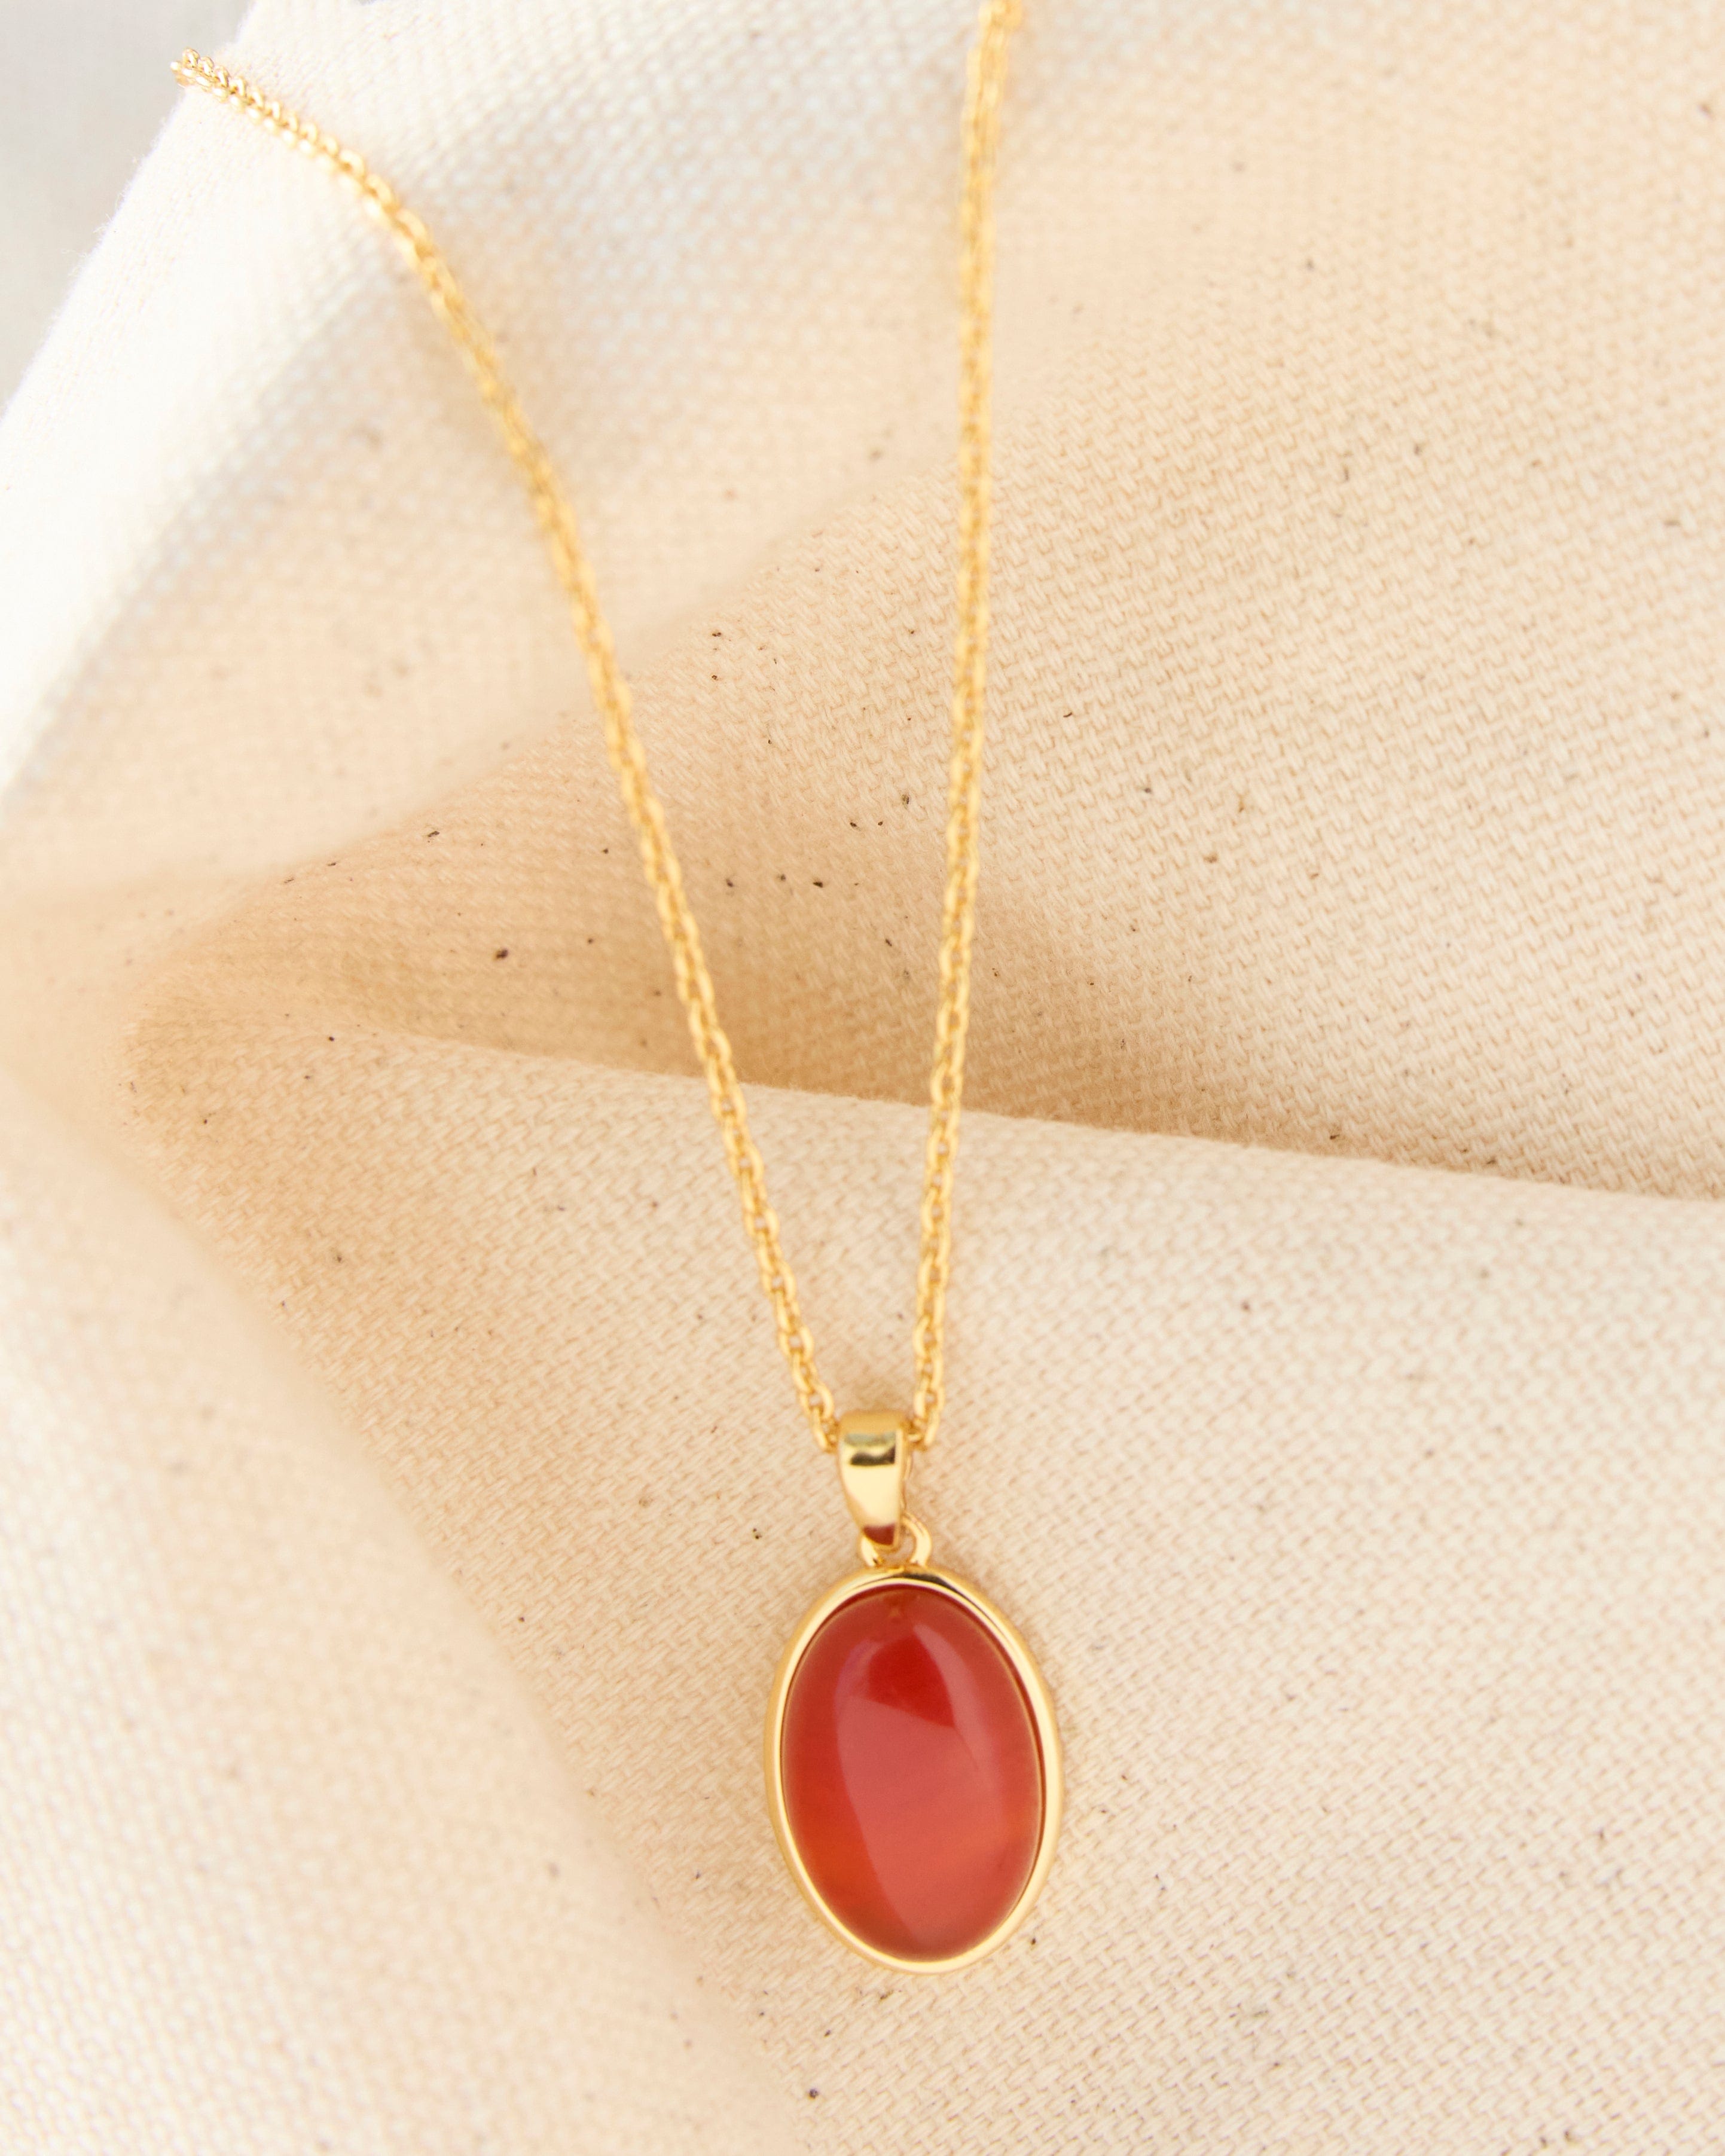 Gold necklace with a brown stone pendant.